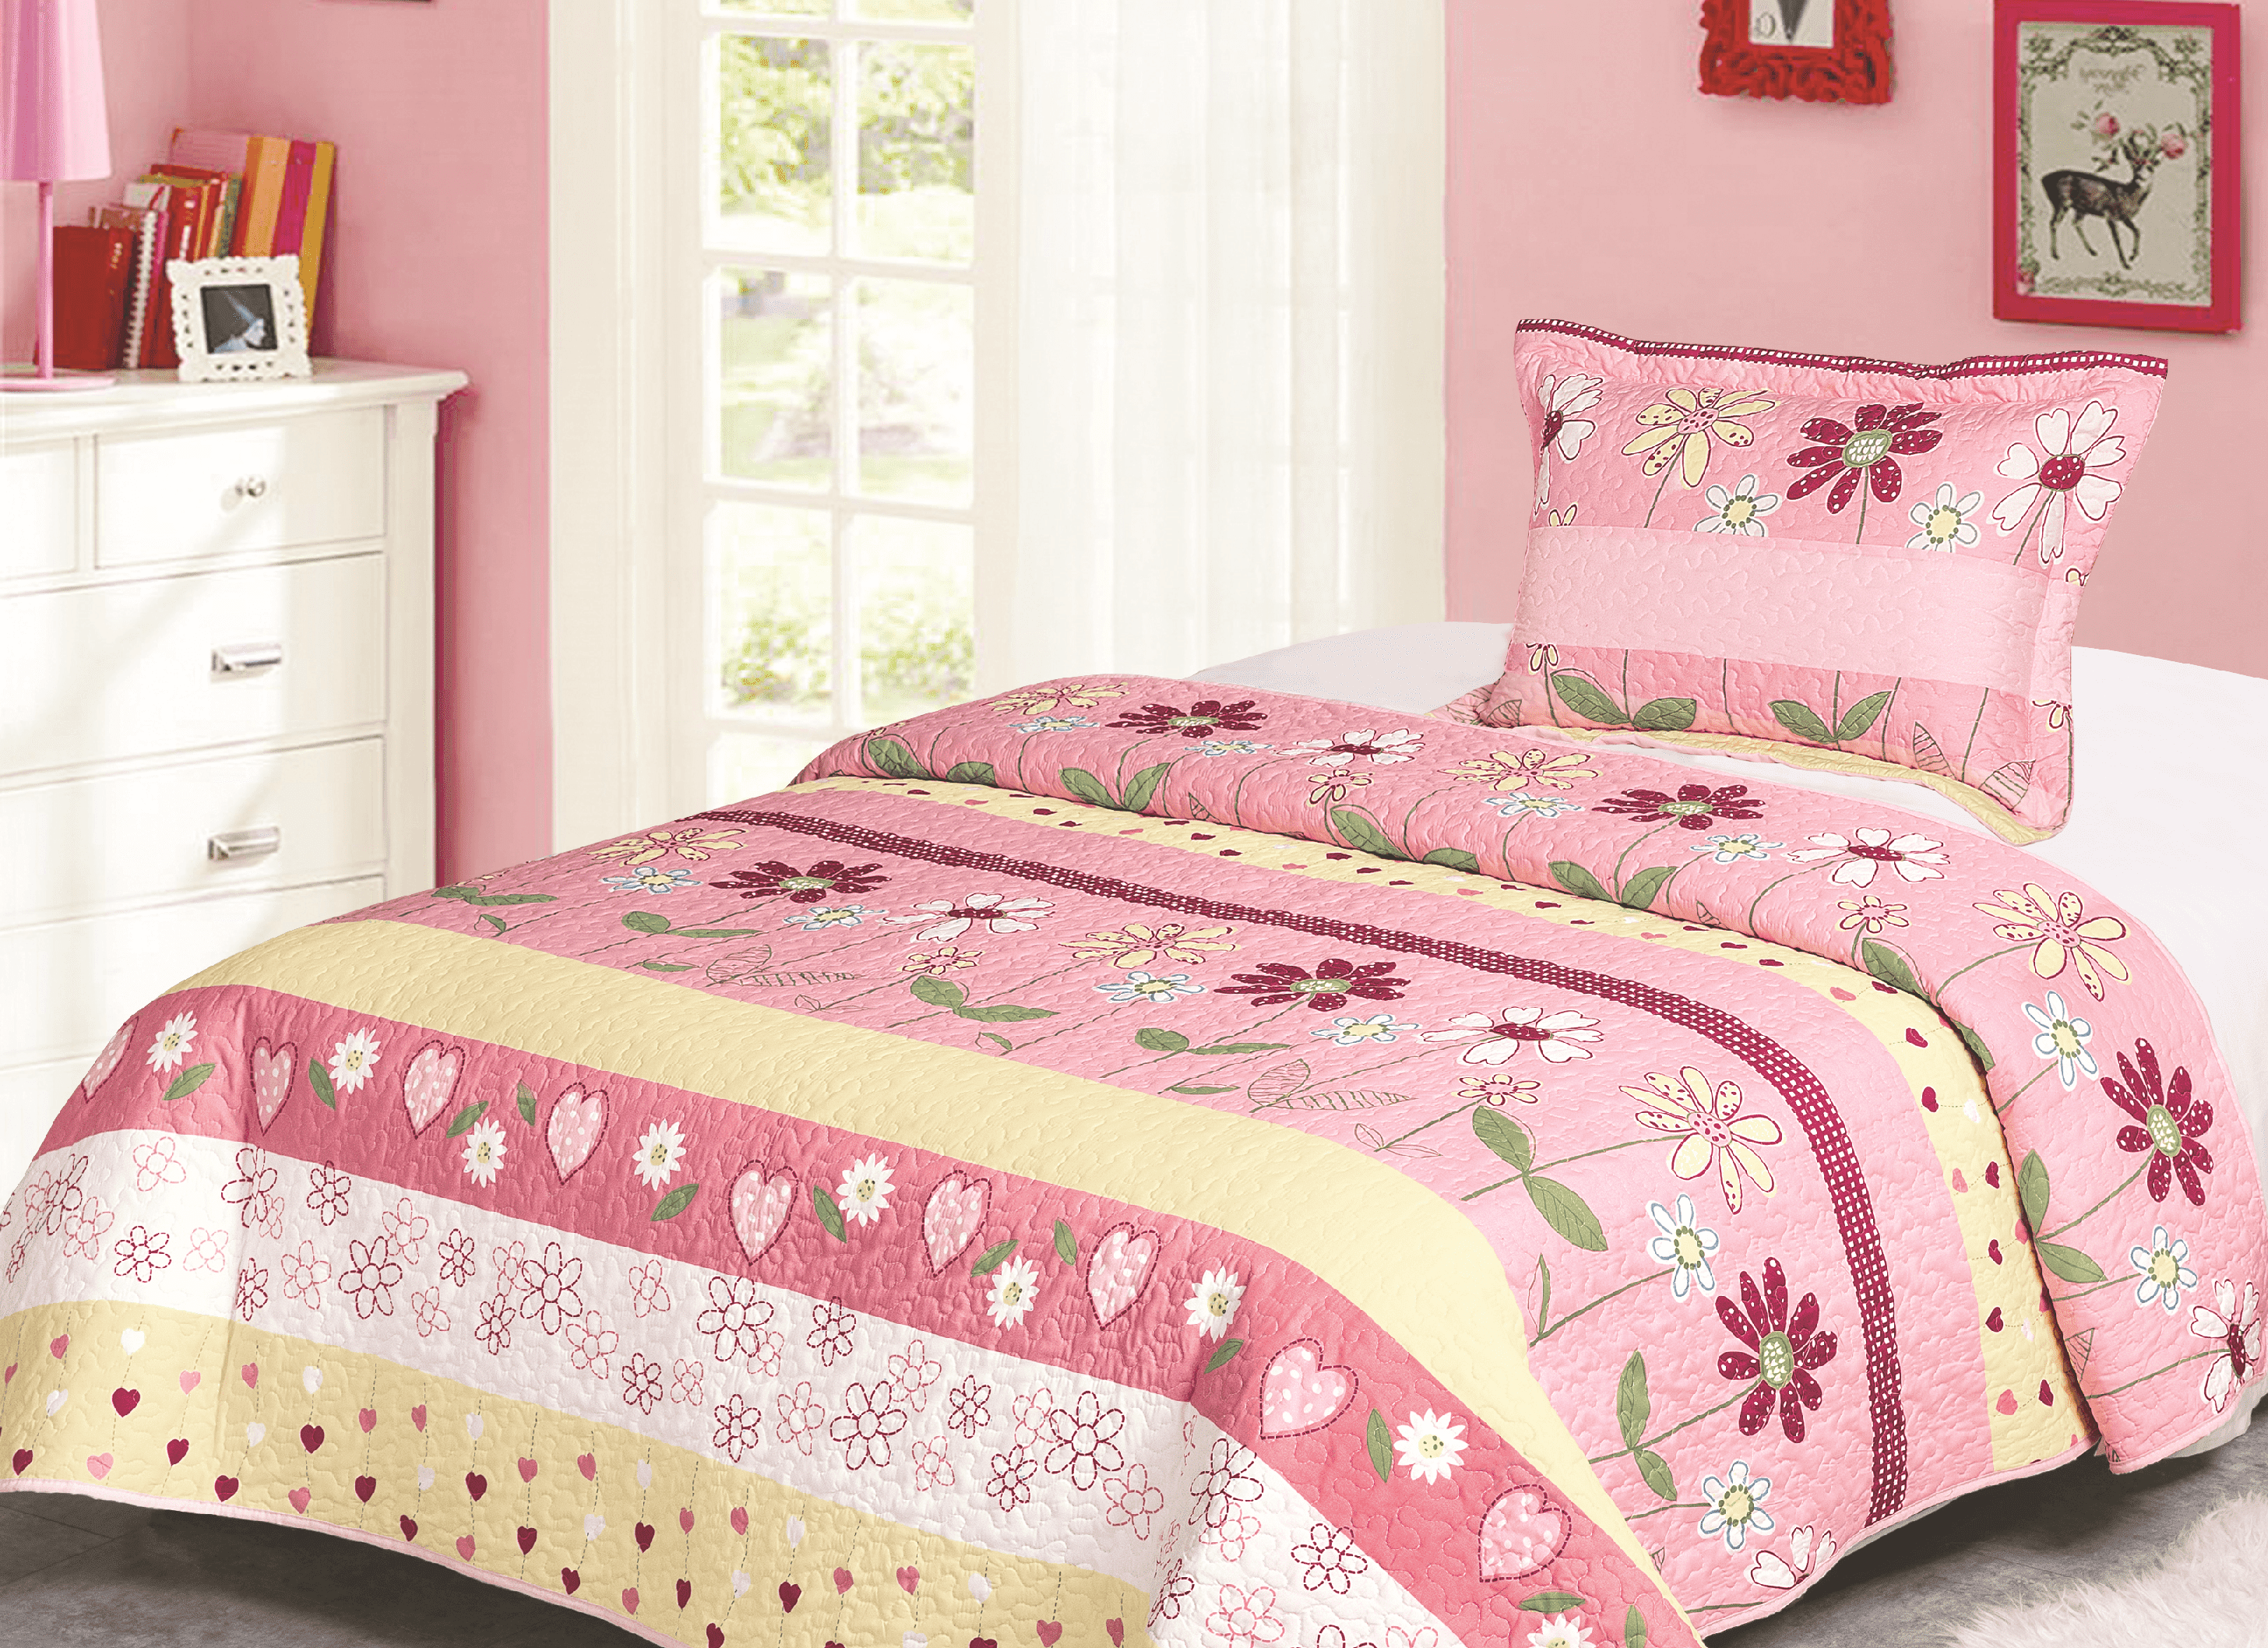 twin size girl bed